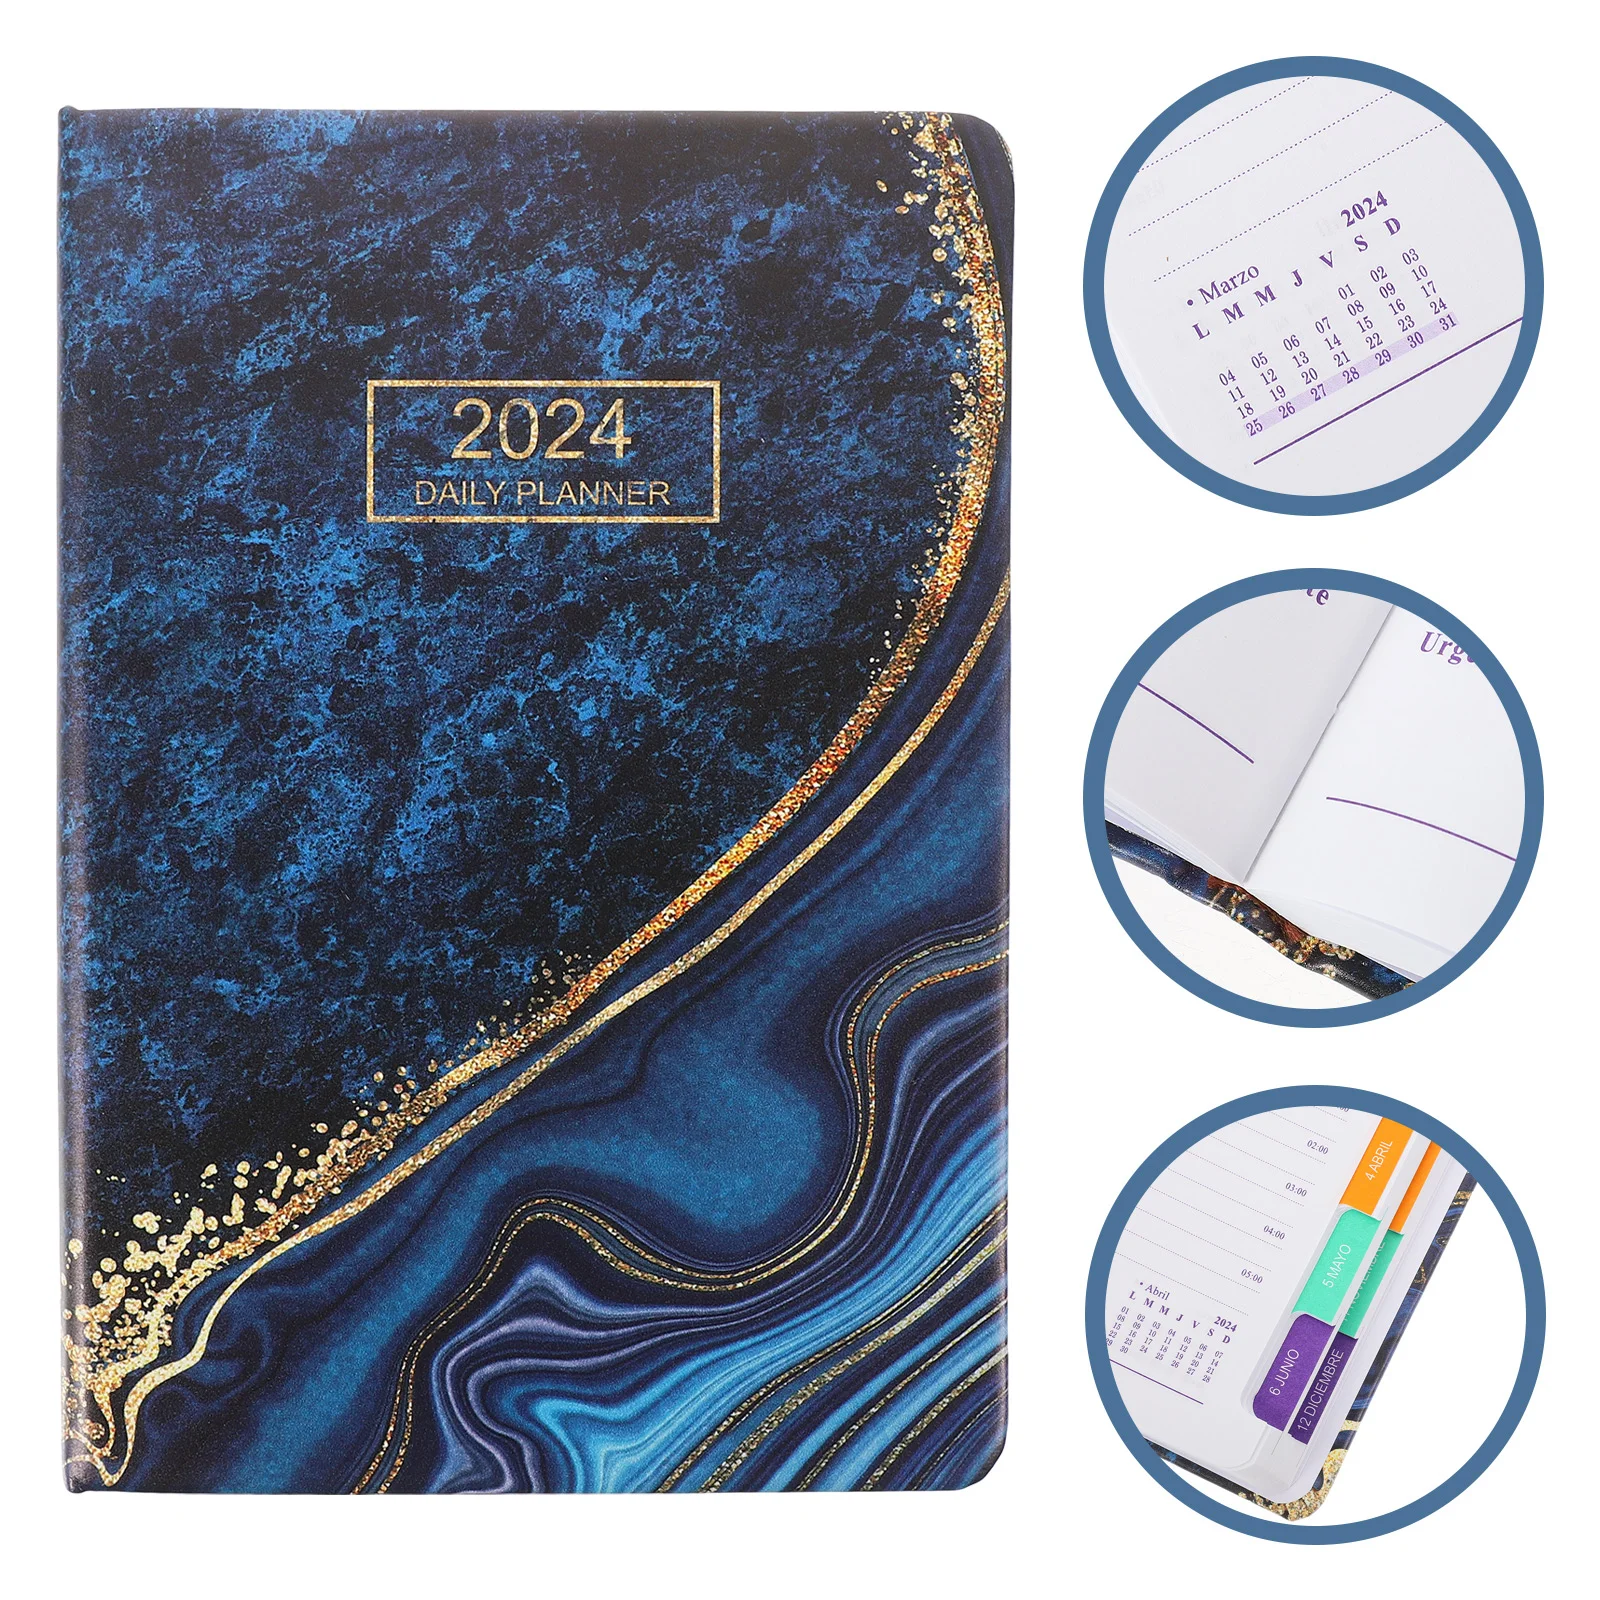 

2023 Plan Book Practical A5 Notepad Exquisite Pads Daily Planner Spanish Portable Notebook Schedule Planners & Organizers Small